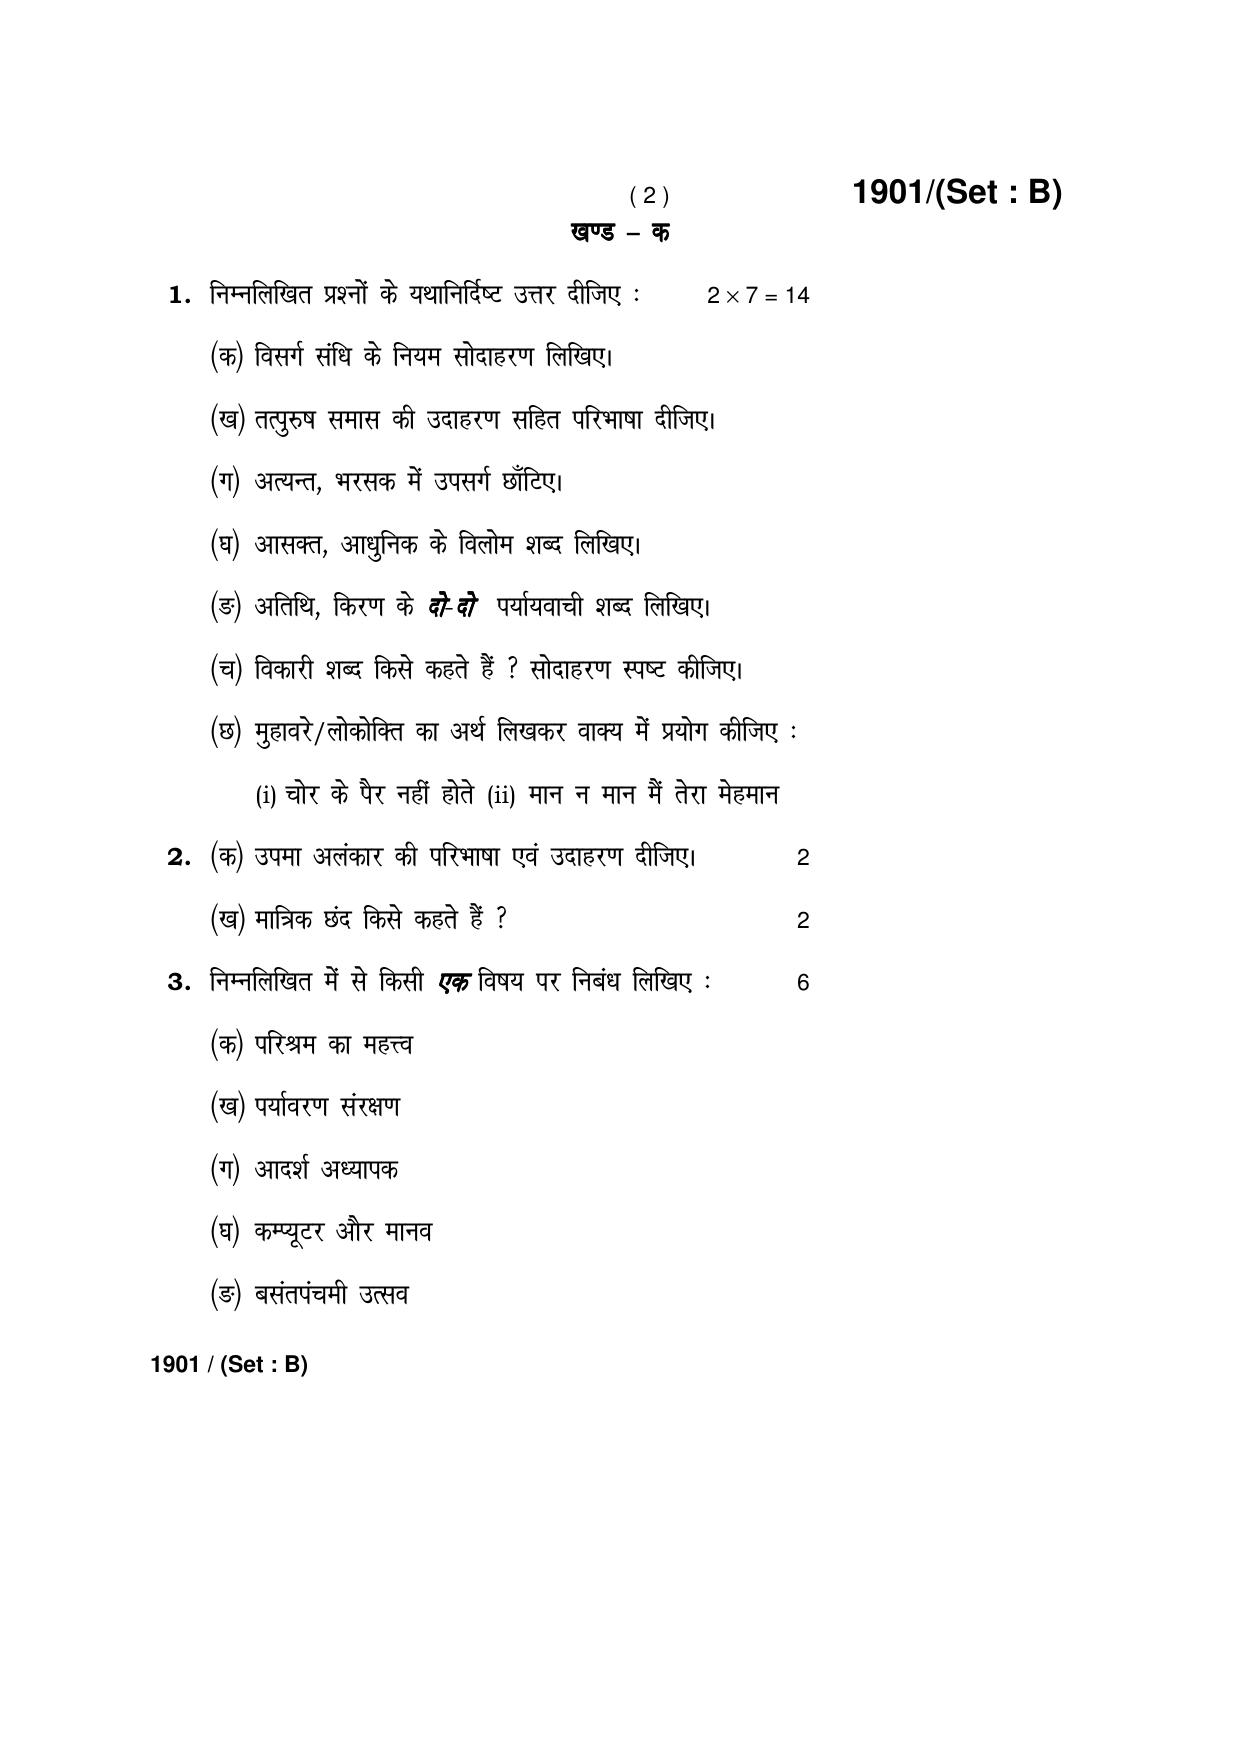 Haryana Board HBSE Class 10 Hindi -B 2017 Question Paper - Page 2